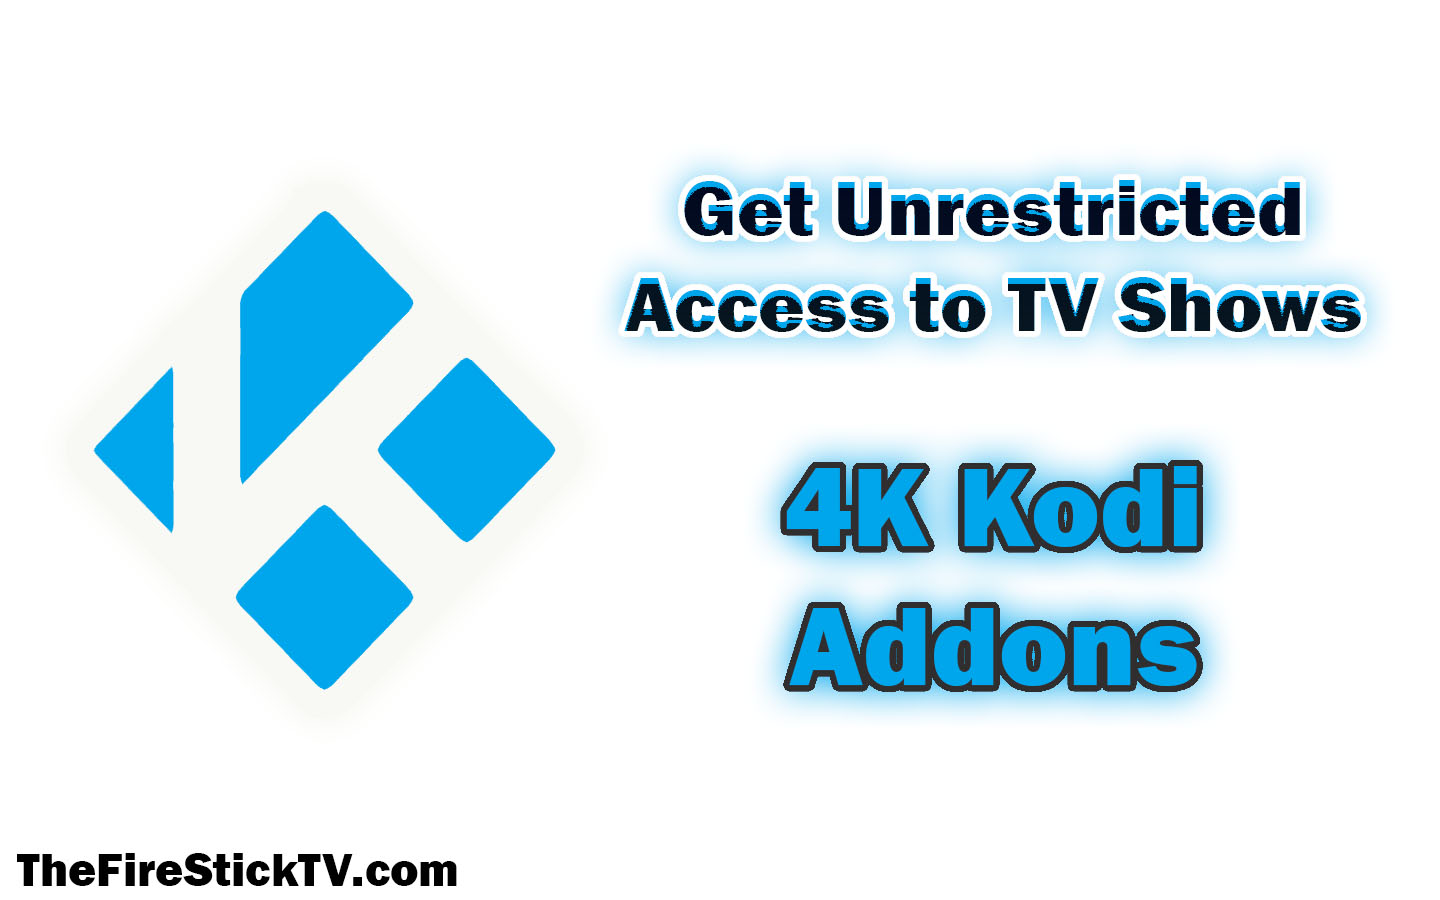 Get Unrestricted Access to TV Shows: Benefits of Installing 4K Kodi Addons